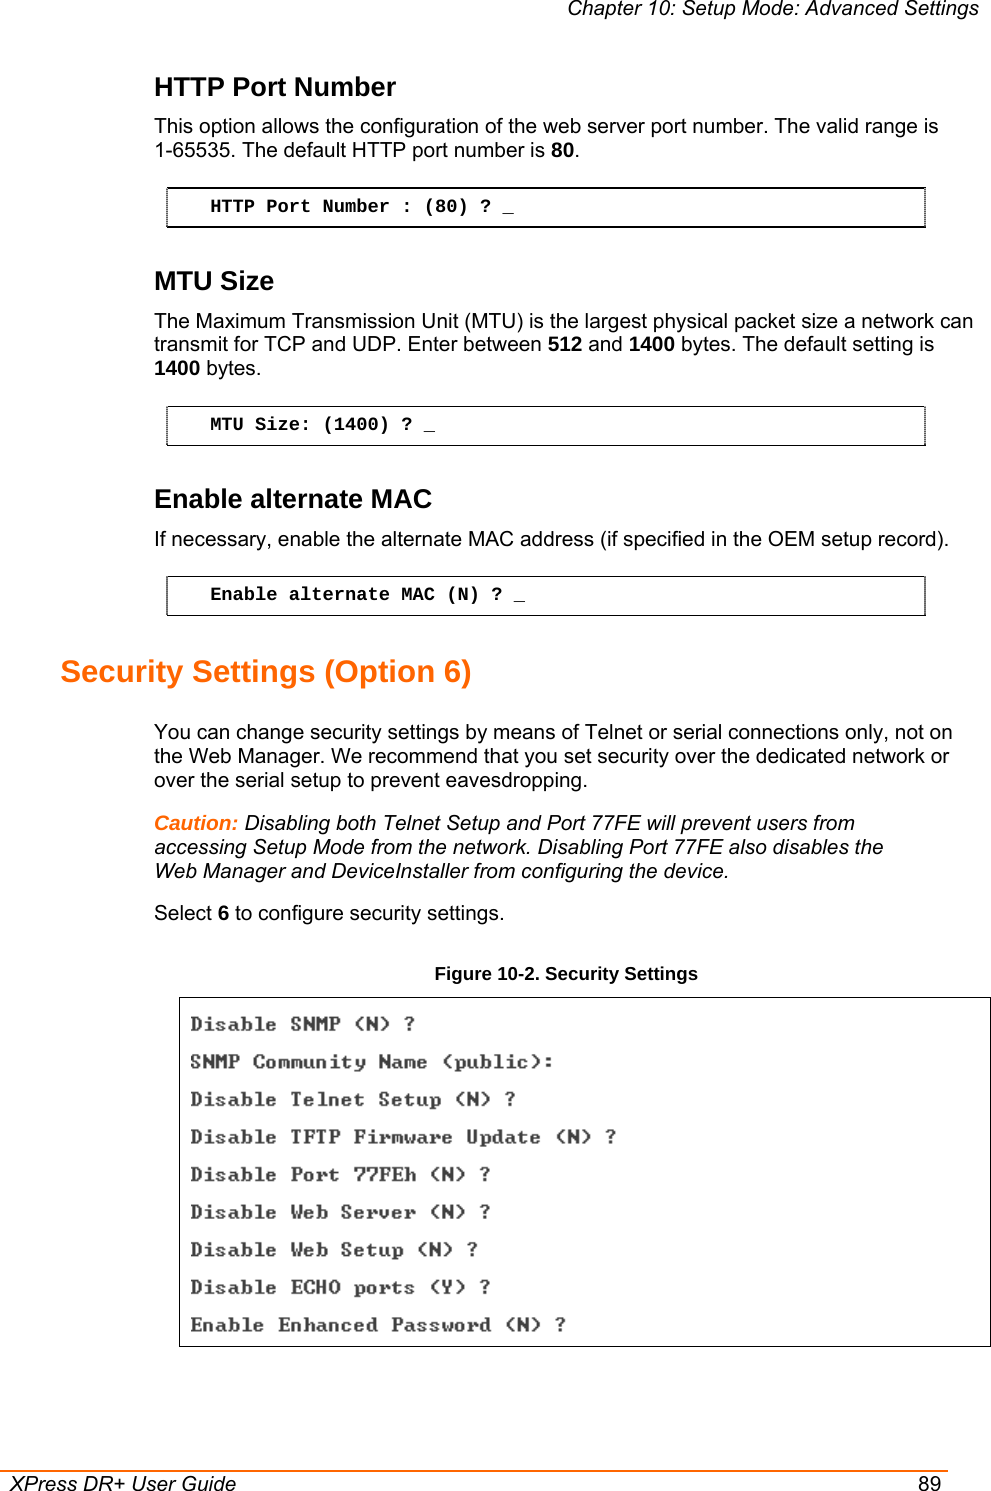 Chapter 10: Setup Mode: Advanced Settings  XPress DR+ User Guide  89 HTTP Port Number This option allows the configuration of the web server port number. The valid range is  1-65535. The default HTTP port number is 80. HTTP Port Number : (80) ? _ MTU Size The Maximum Transmission Unit (MTU) is the largest physical packet size a network can transmit for TCP and UDP. Enter between 512 and 1400 bytes. The default setting is 1400 bytes. MTU Size: (1400) ? _ Enable alternate MAC If necessary, enable the alternate MAC address (if specified in the OEM setup record). Enable alternate MAC (N) ? _ Security Settings (Option 6) You can change security settings by means of Telnet or serial connections only, not on the Web Manager. We recommend that you set security over the dedicated network or over the serial setup to prevent eavesdropping. Caution: Disabling both Telnet Setup and Port 77FE will prevent users from accessing Setup Mode from the network. Disabling Port 77FE also disables the Web Manager and DeviceInstaller from configuring the device. Select 6 to configure security settings. Figure 10-2. Security Settings   